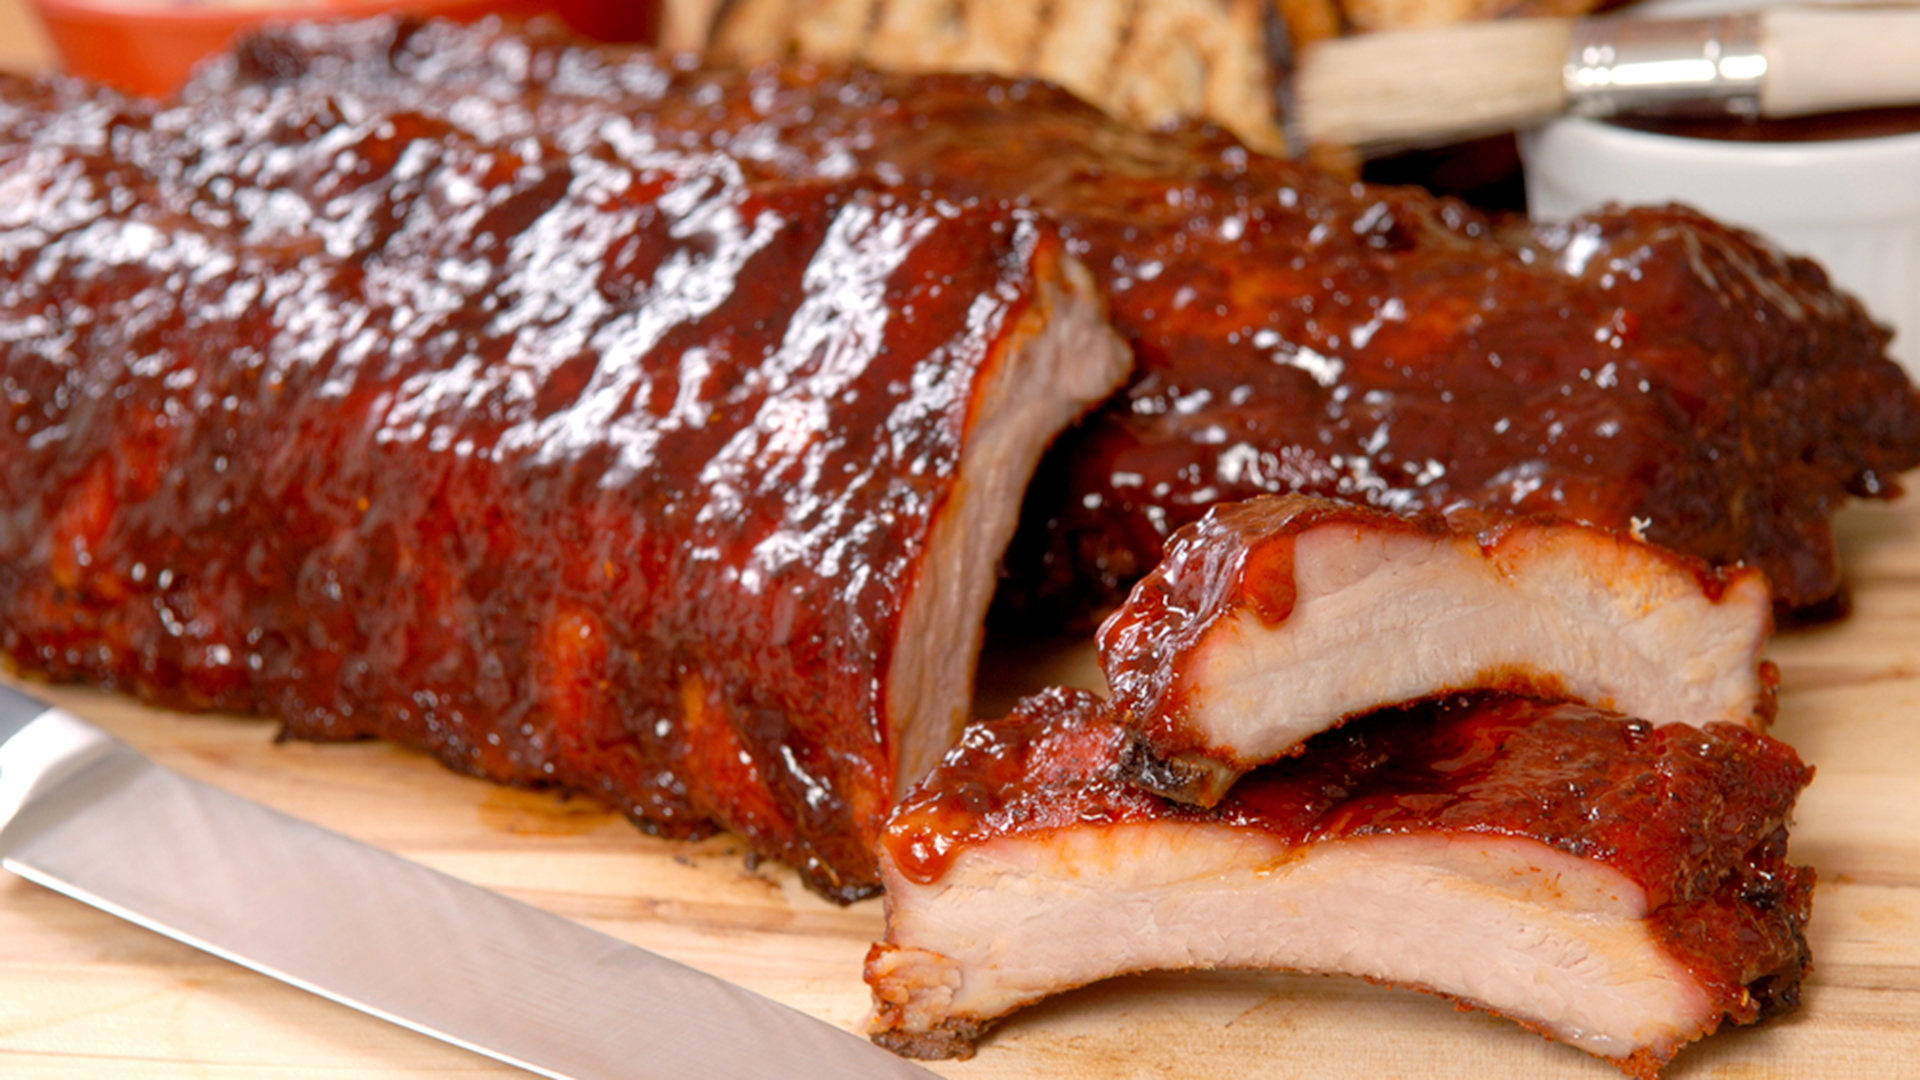 Fall-off-the-Bone Tender Dr. Pepper BBQ Crockpot Ribs: Discover the Secret to the Most Delicious Ribs You'll Ever Taste 3